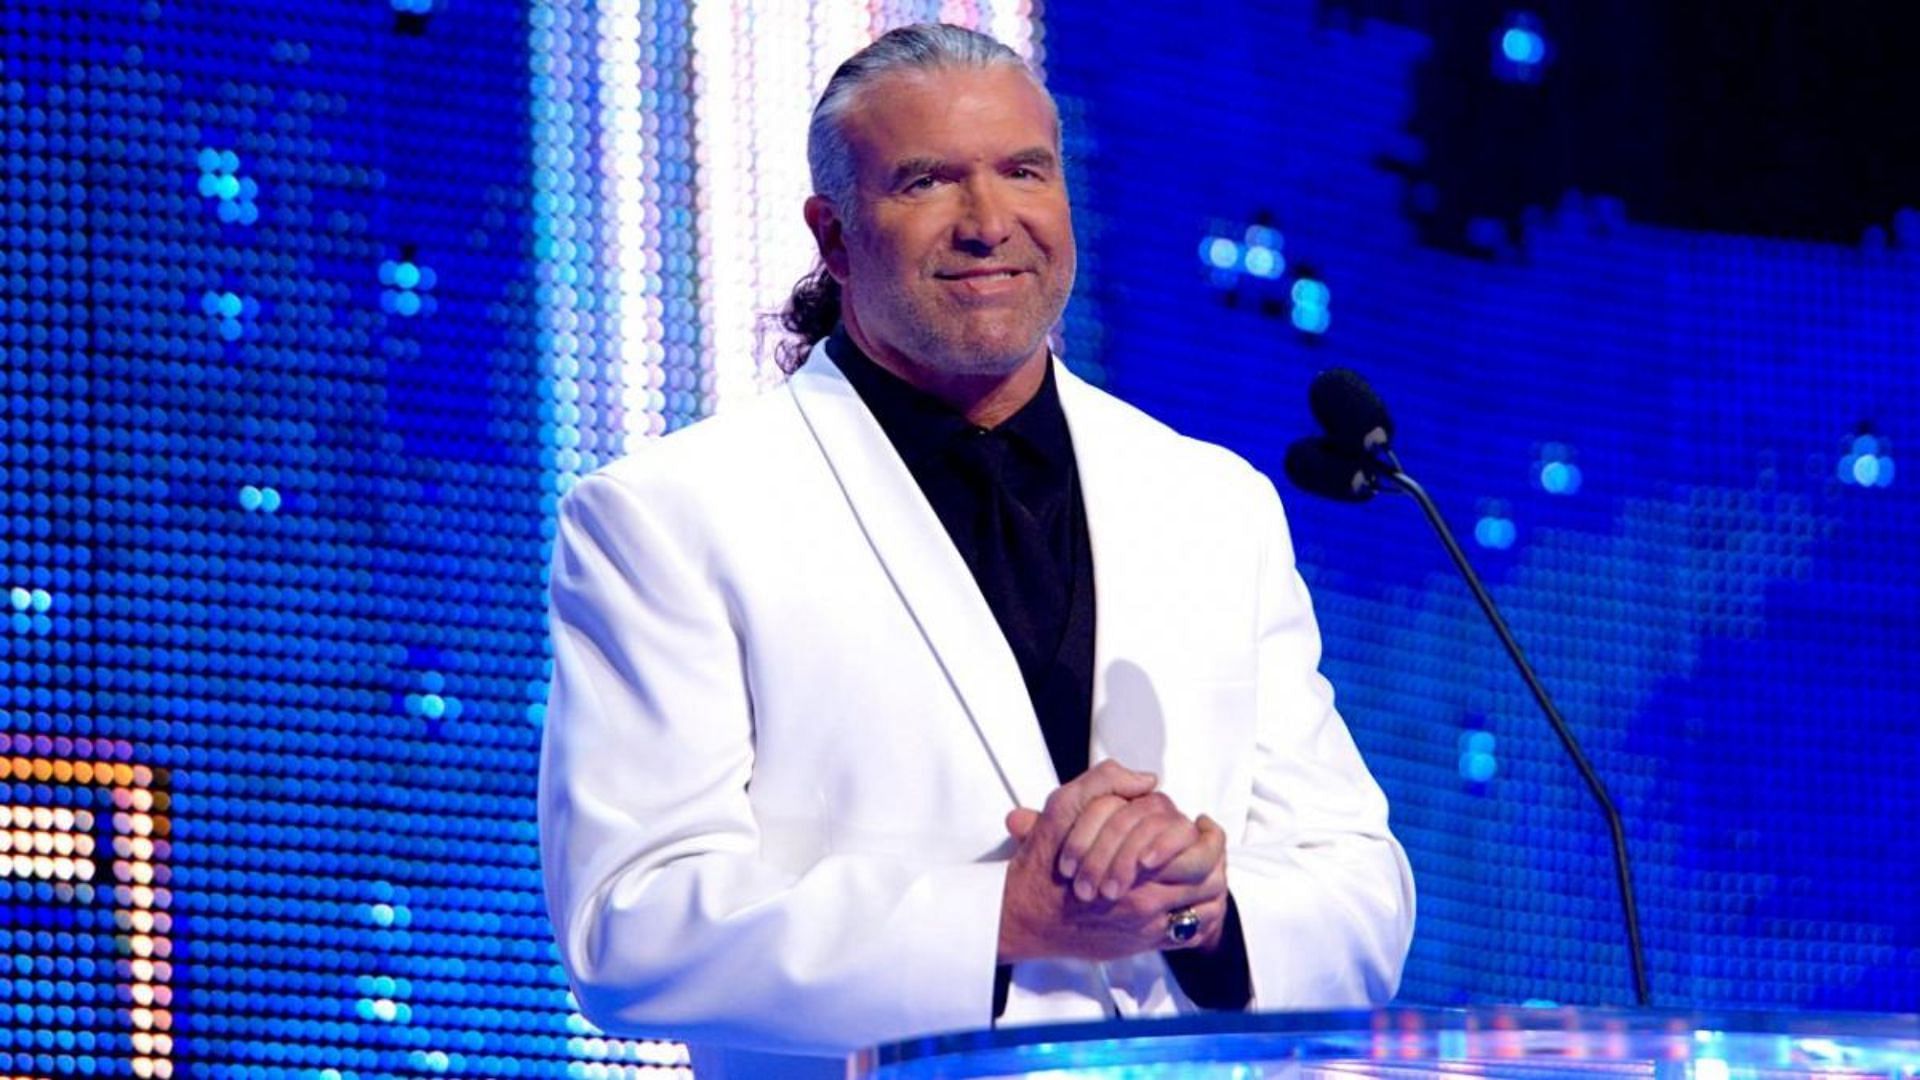 Scott Hall was a highly-respected personality in the world of professional wrestling.